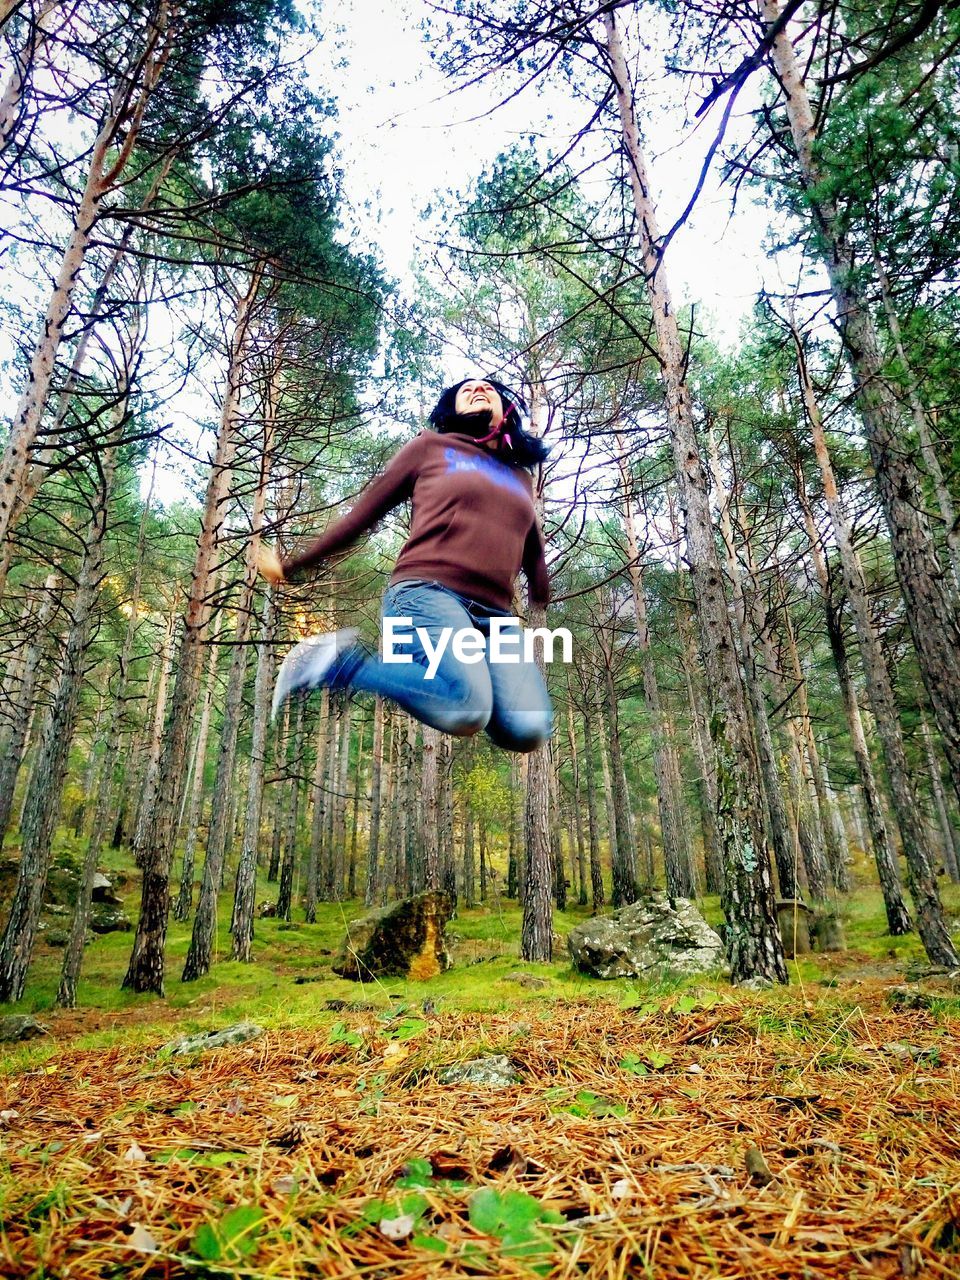 LOW ANGLE VIEW OF YOUNG WOMAN IN MID-AIR AGAINST TREES IN FOREST